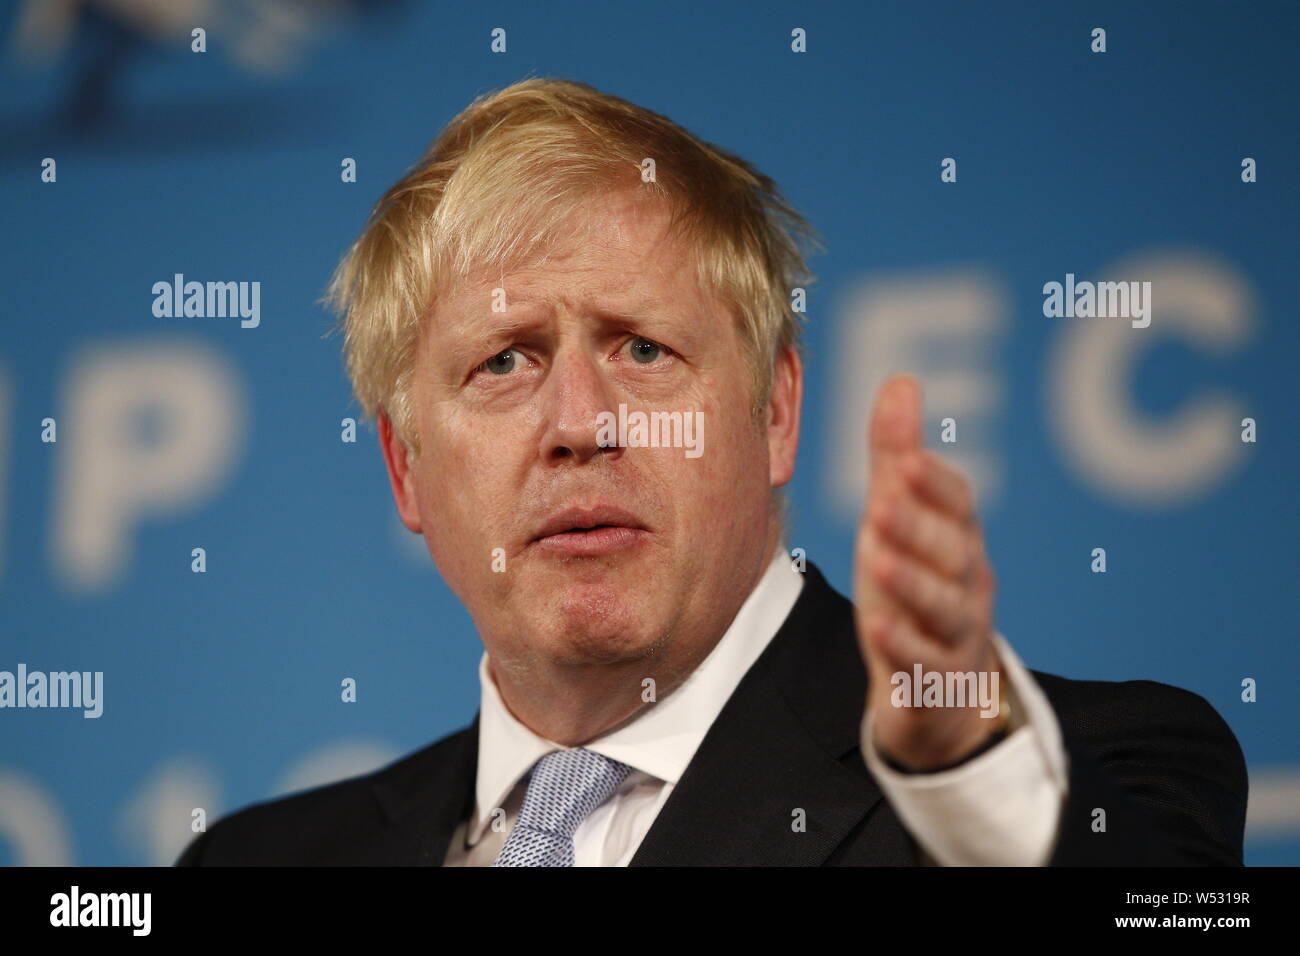 Boris speaks to the crowd of party members. Contenders in the Conservative Party leadership competition, Jeremy Hunt and Boris Johnson at Hustings in Bournemouth, Dorset. on June 27, 2019 Stock Photo